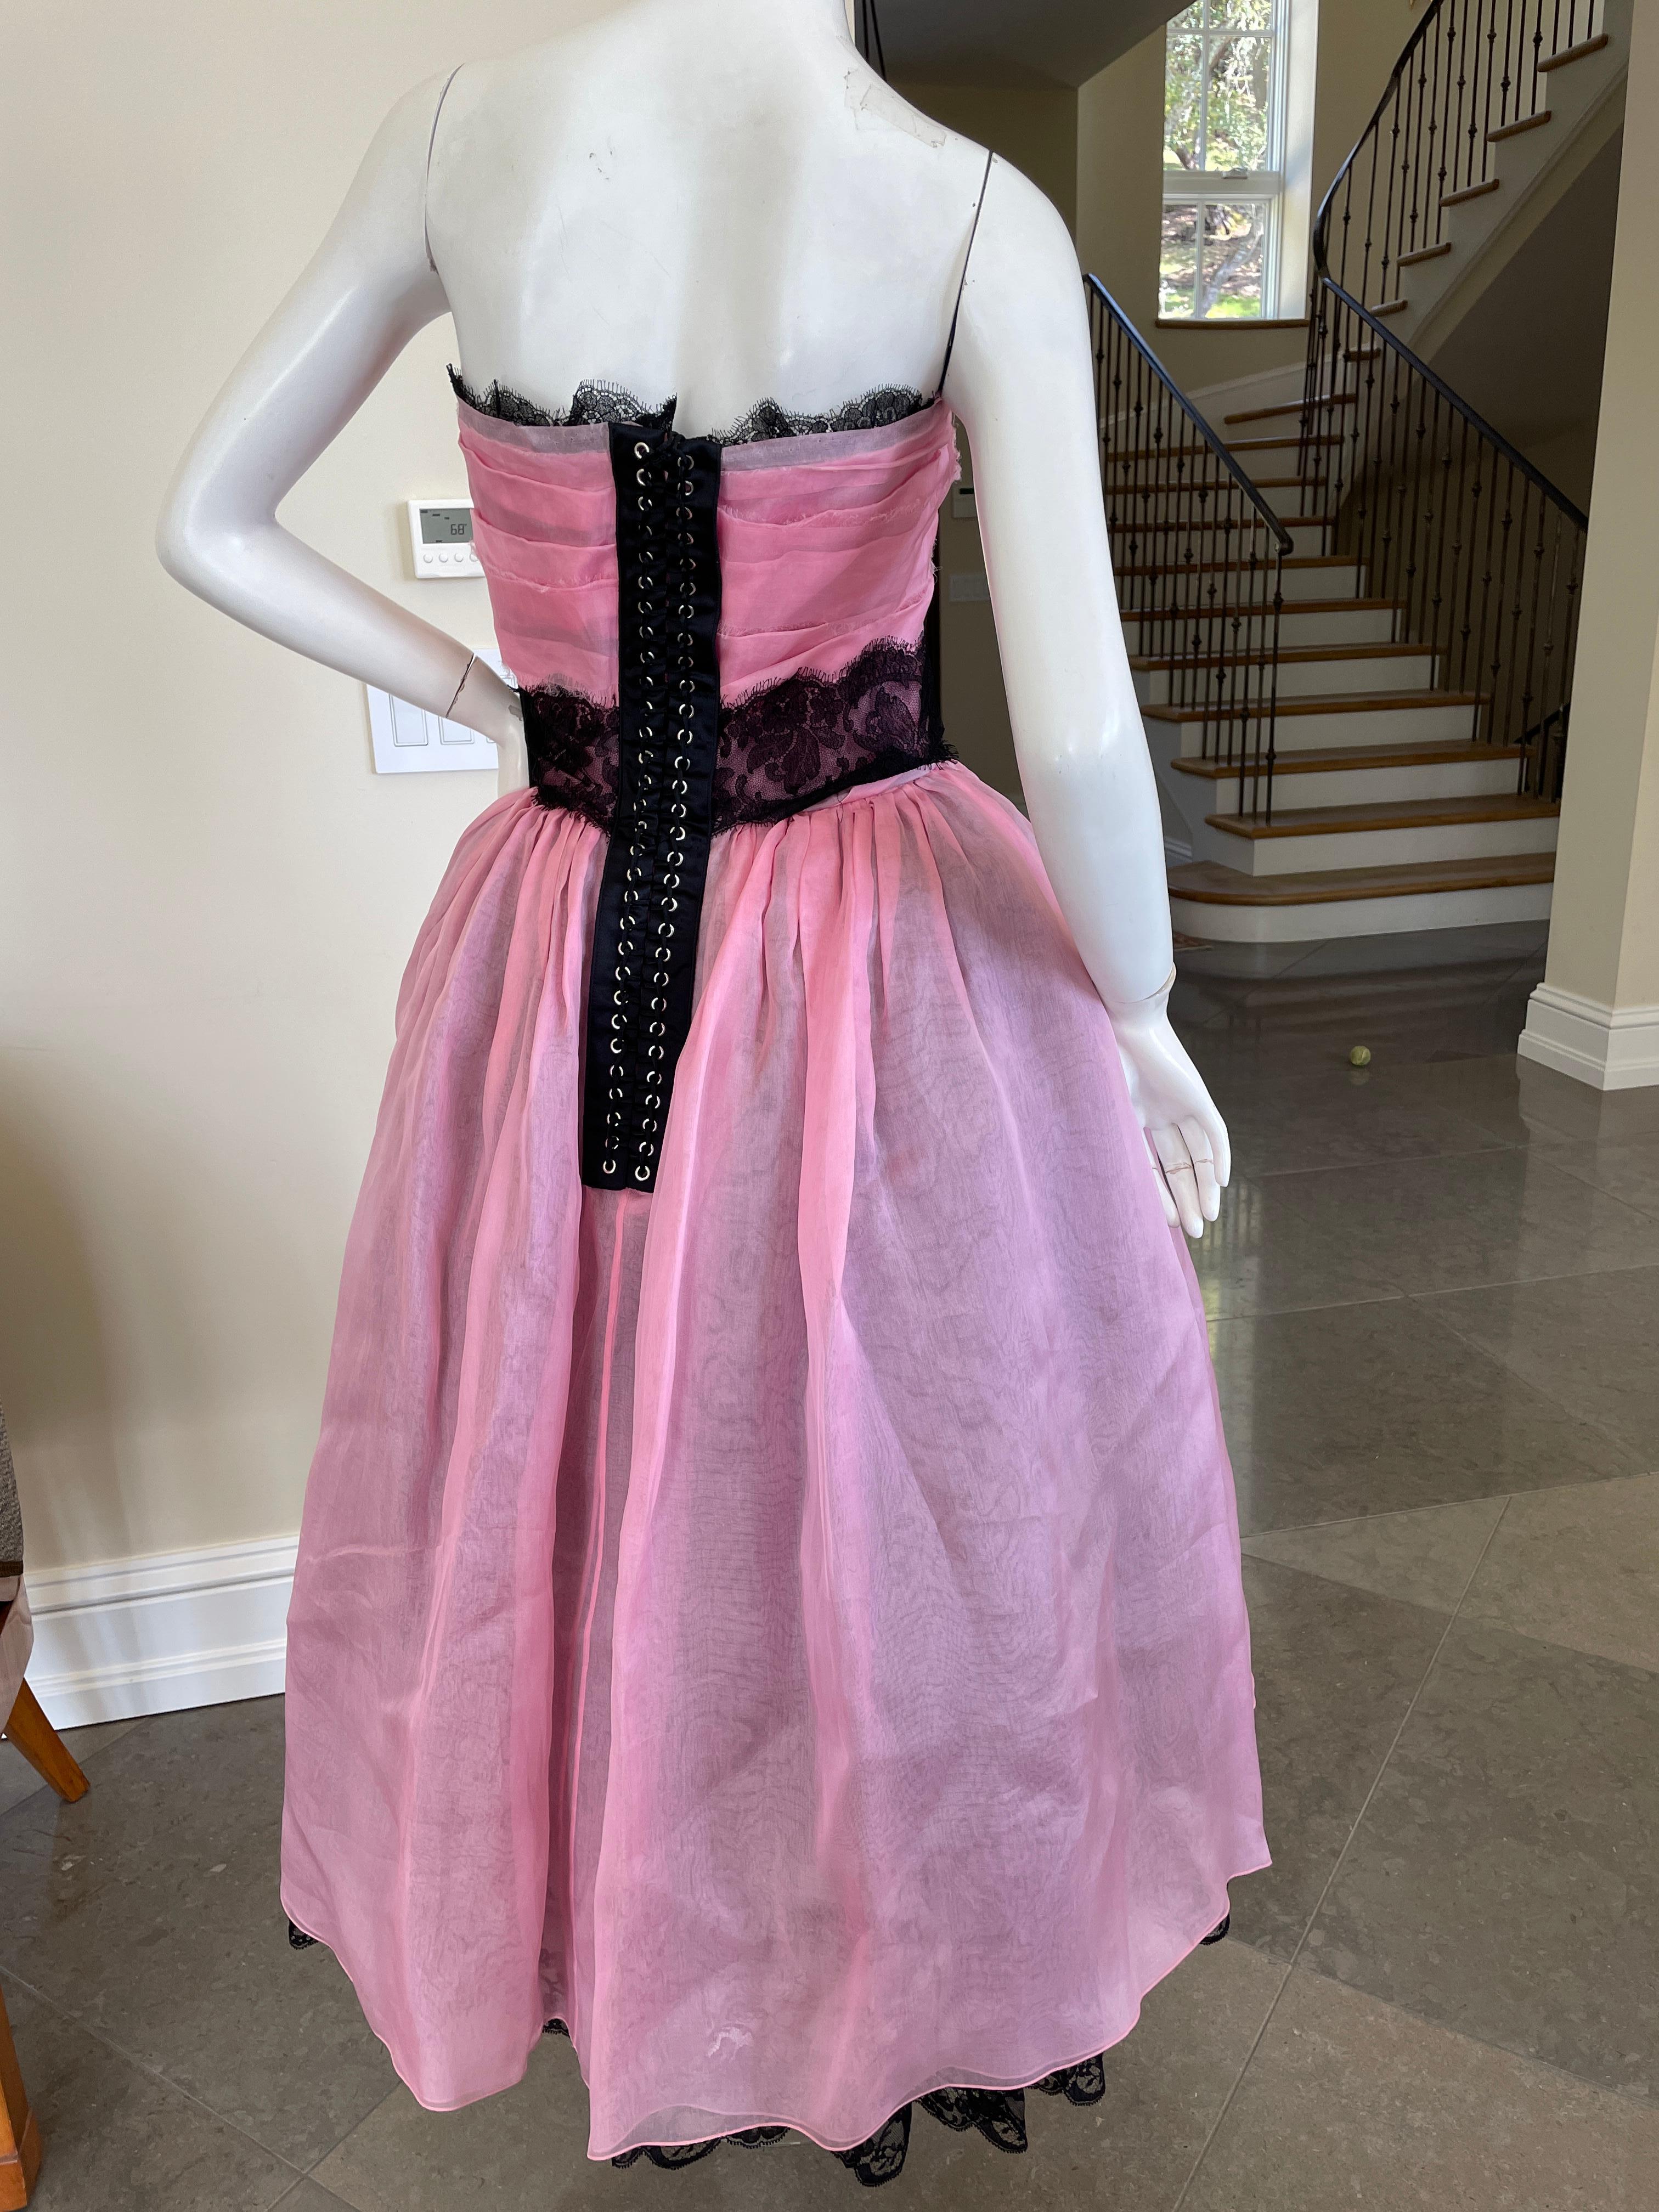 Dolce & Gabbana Pink 1950's Style Vintage Cocktail Dress w Corset Lacing Detail  For Sale 3